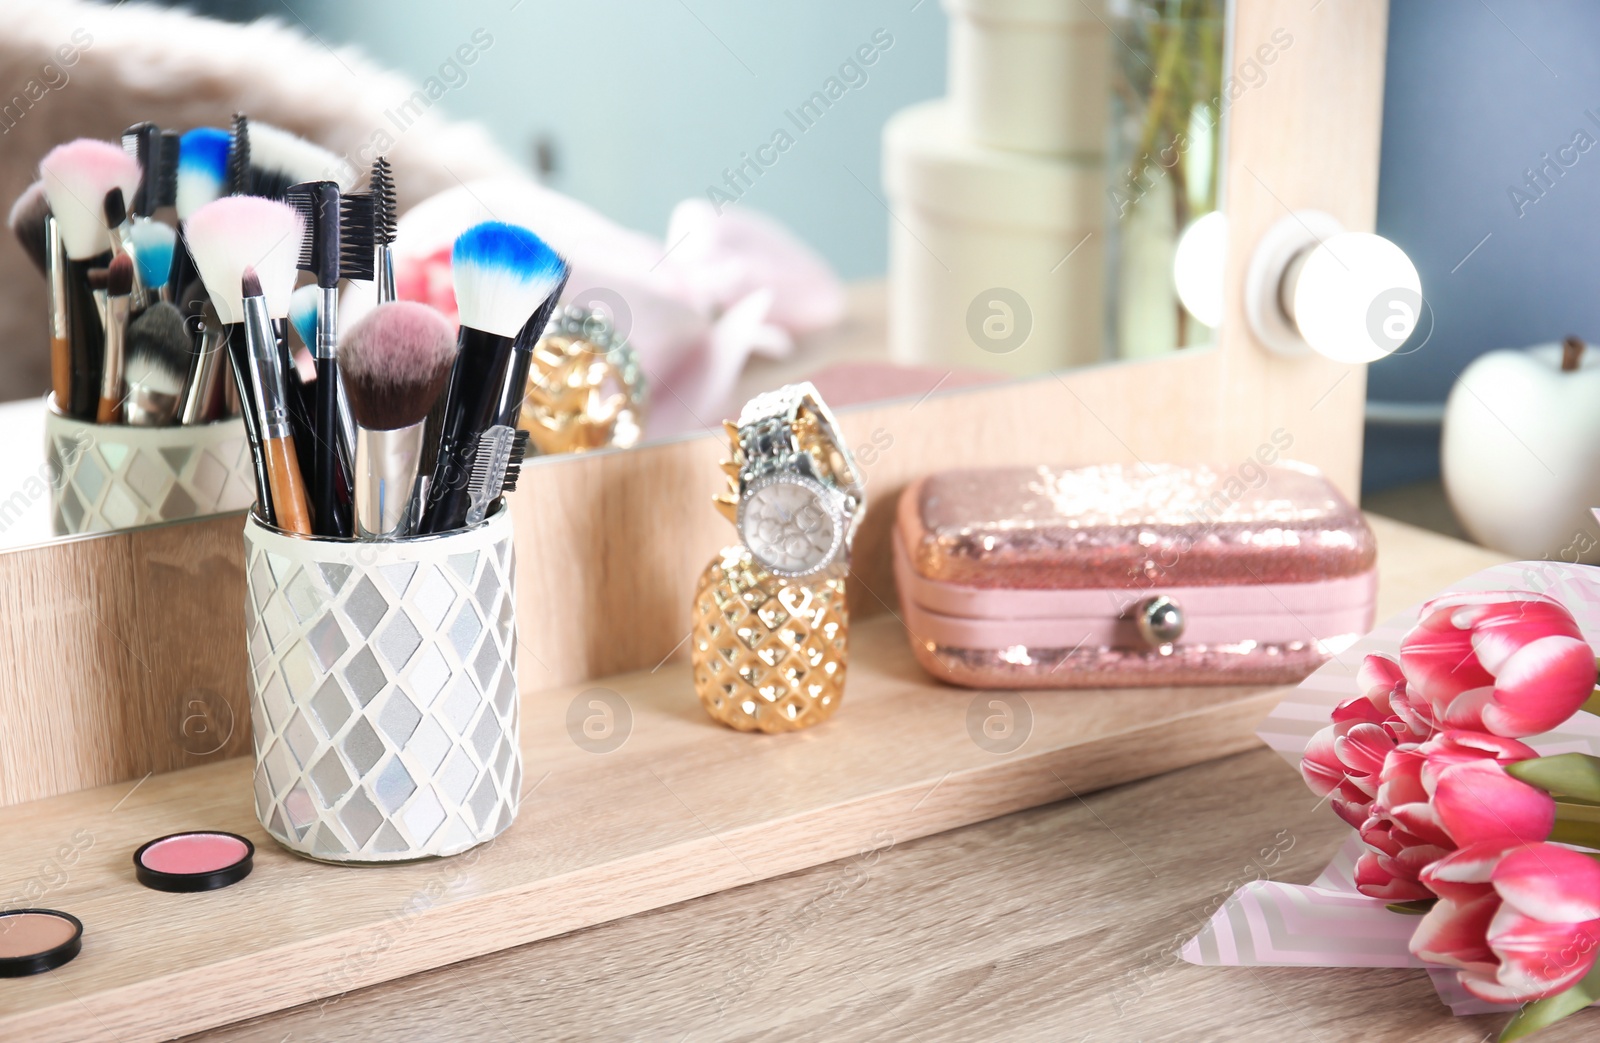 Photo of Holder with professional makeup brushes and tulip bouquet on wooden table